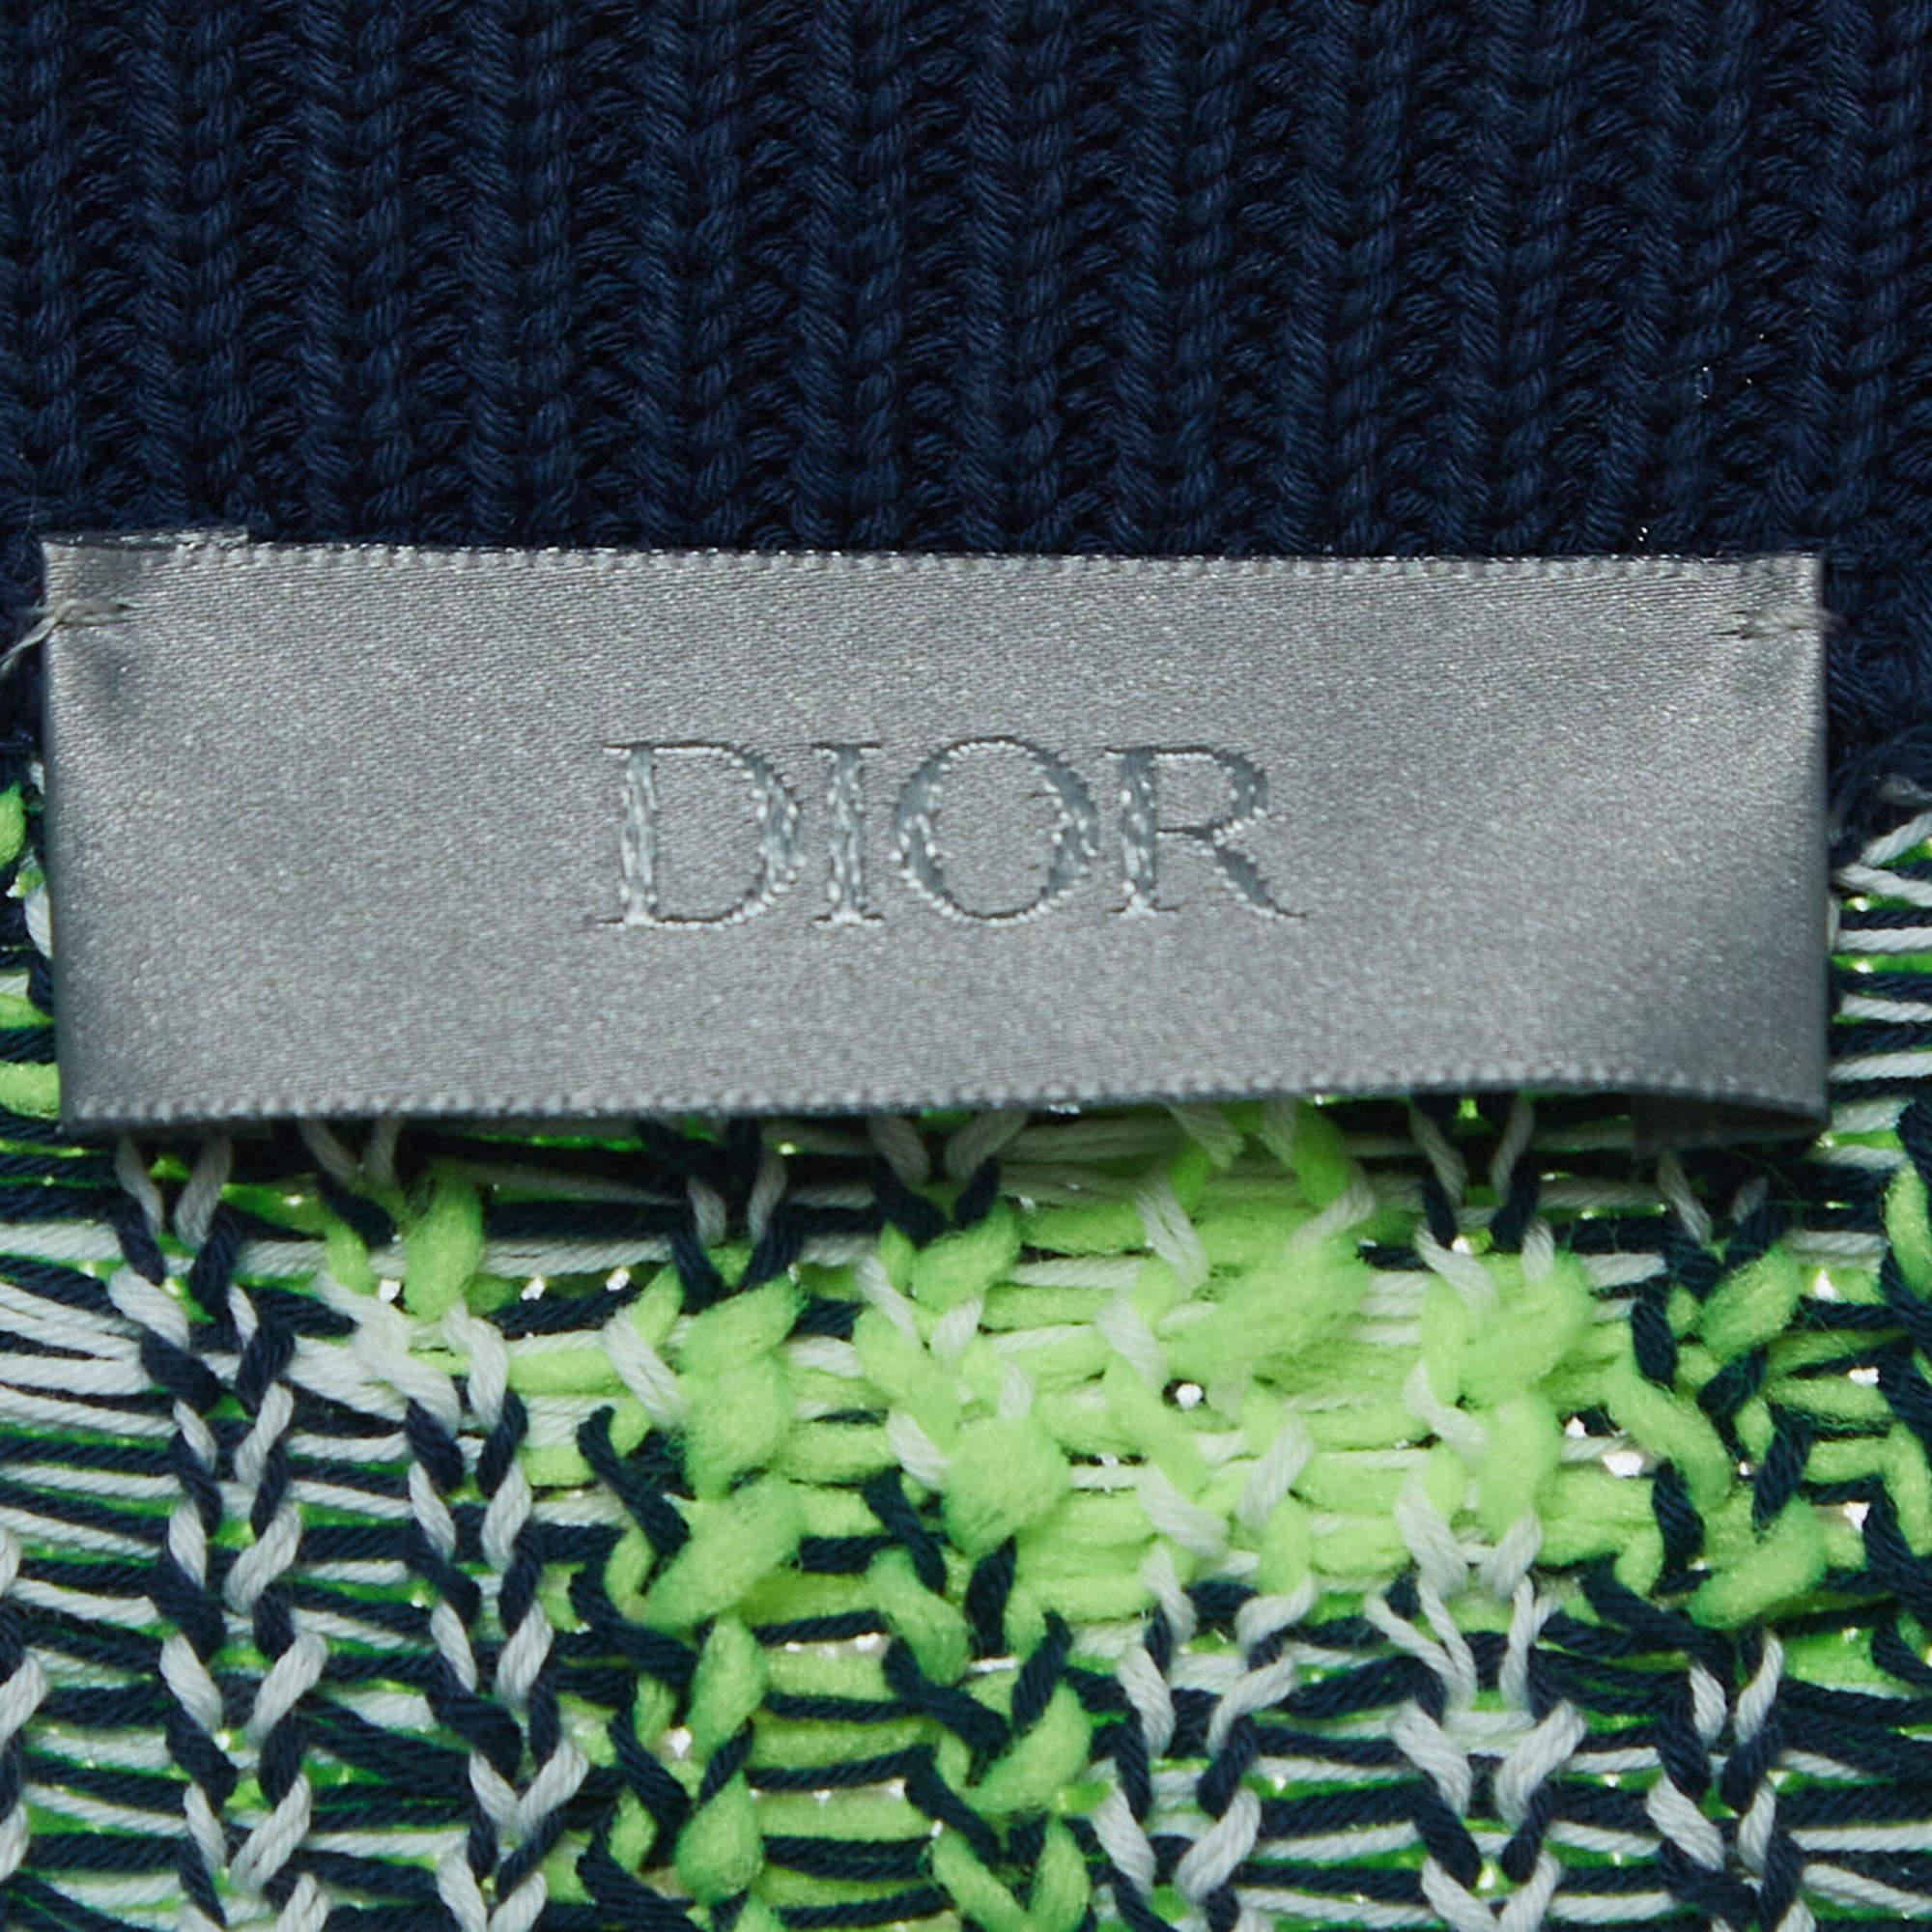 Dior Homme Neon Green Floral Intarsia Knit Full Sleeve Sweatshirt M In Excellent Condition For Sale In Dubai, Al Qouz 2